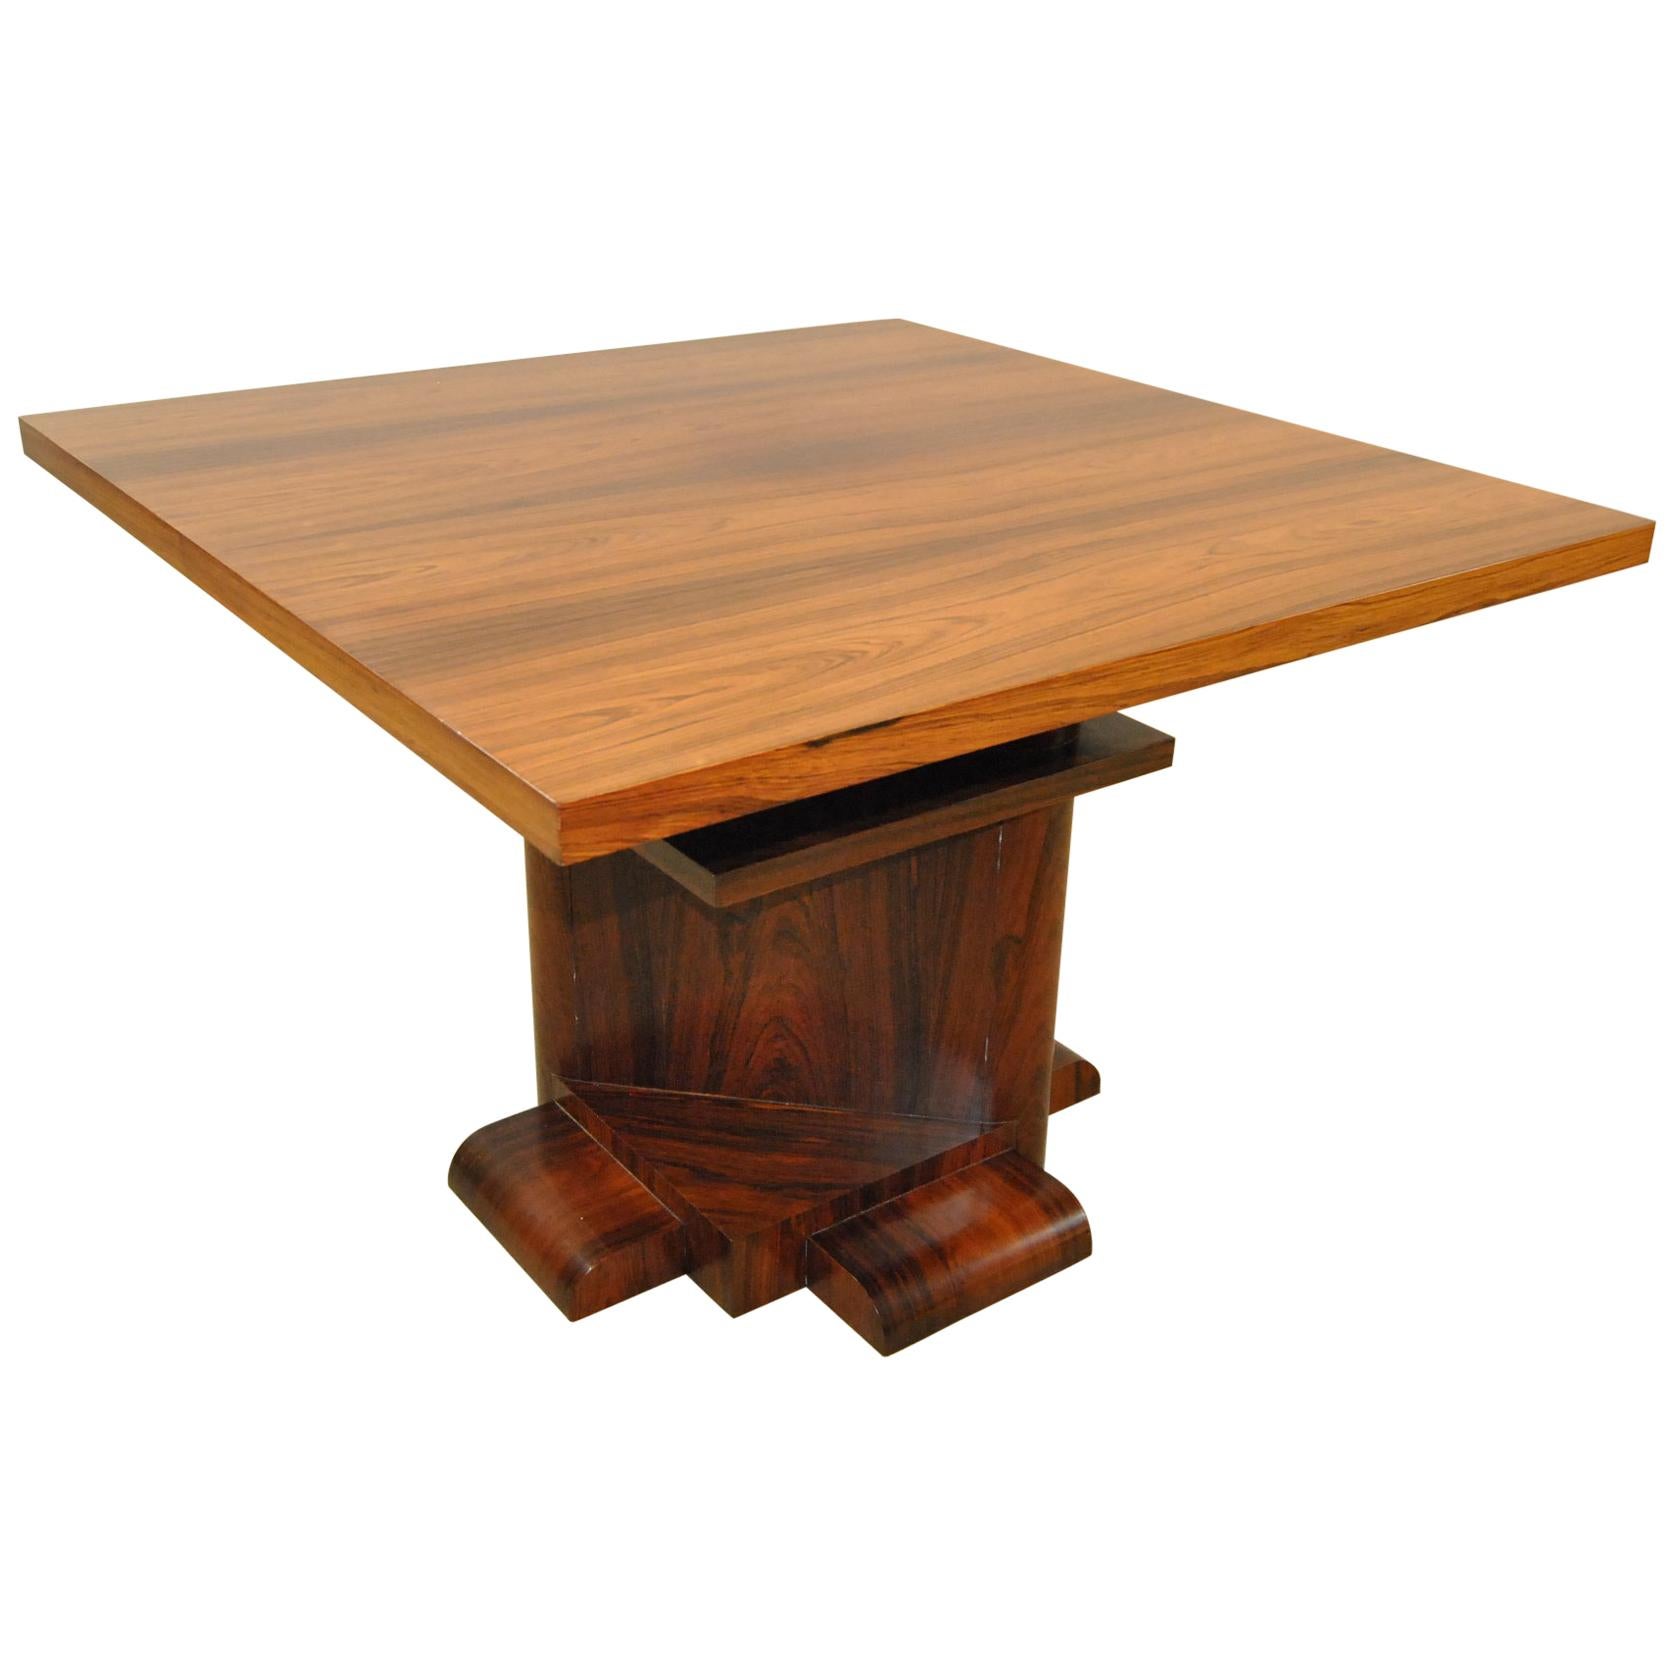 Rosewood Centre Table by Larry Lazlo/Bexley Heath for Widdicomb Numbered 25/100